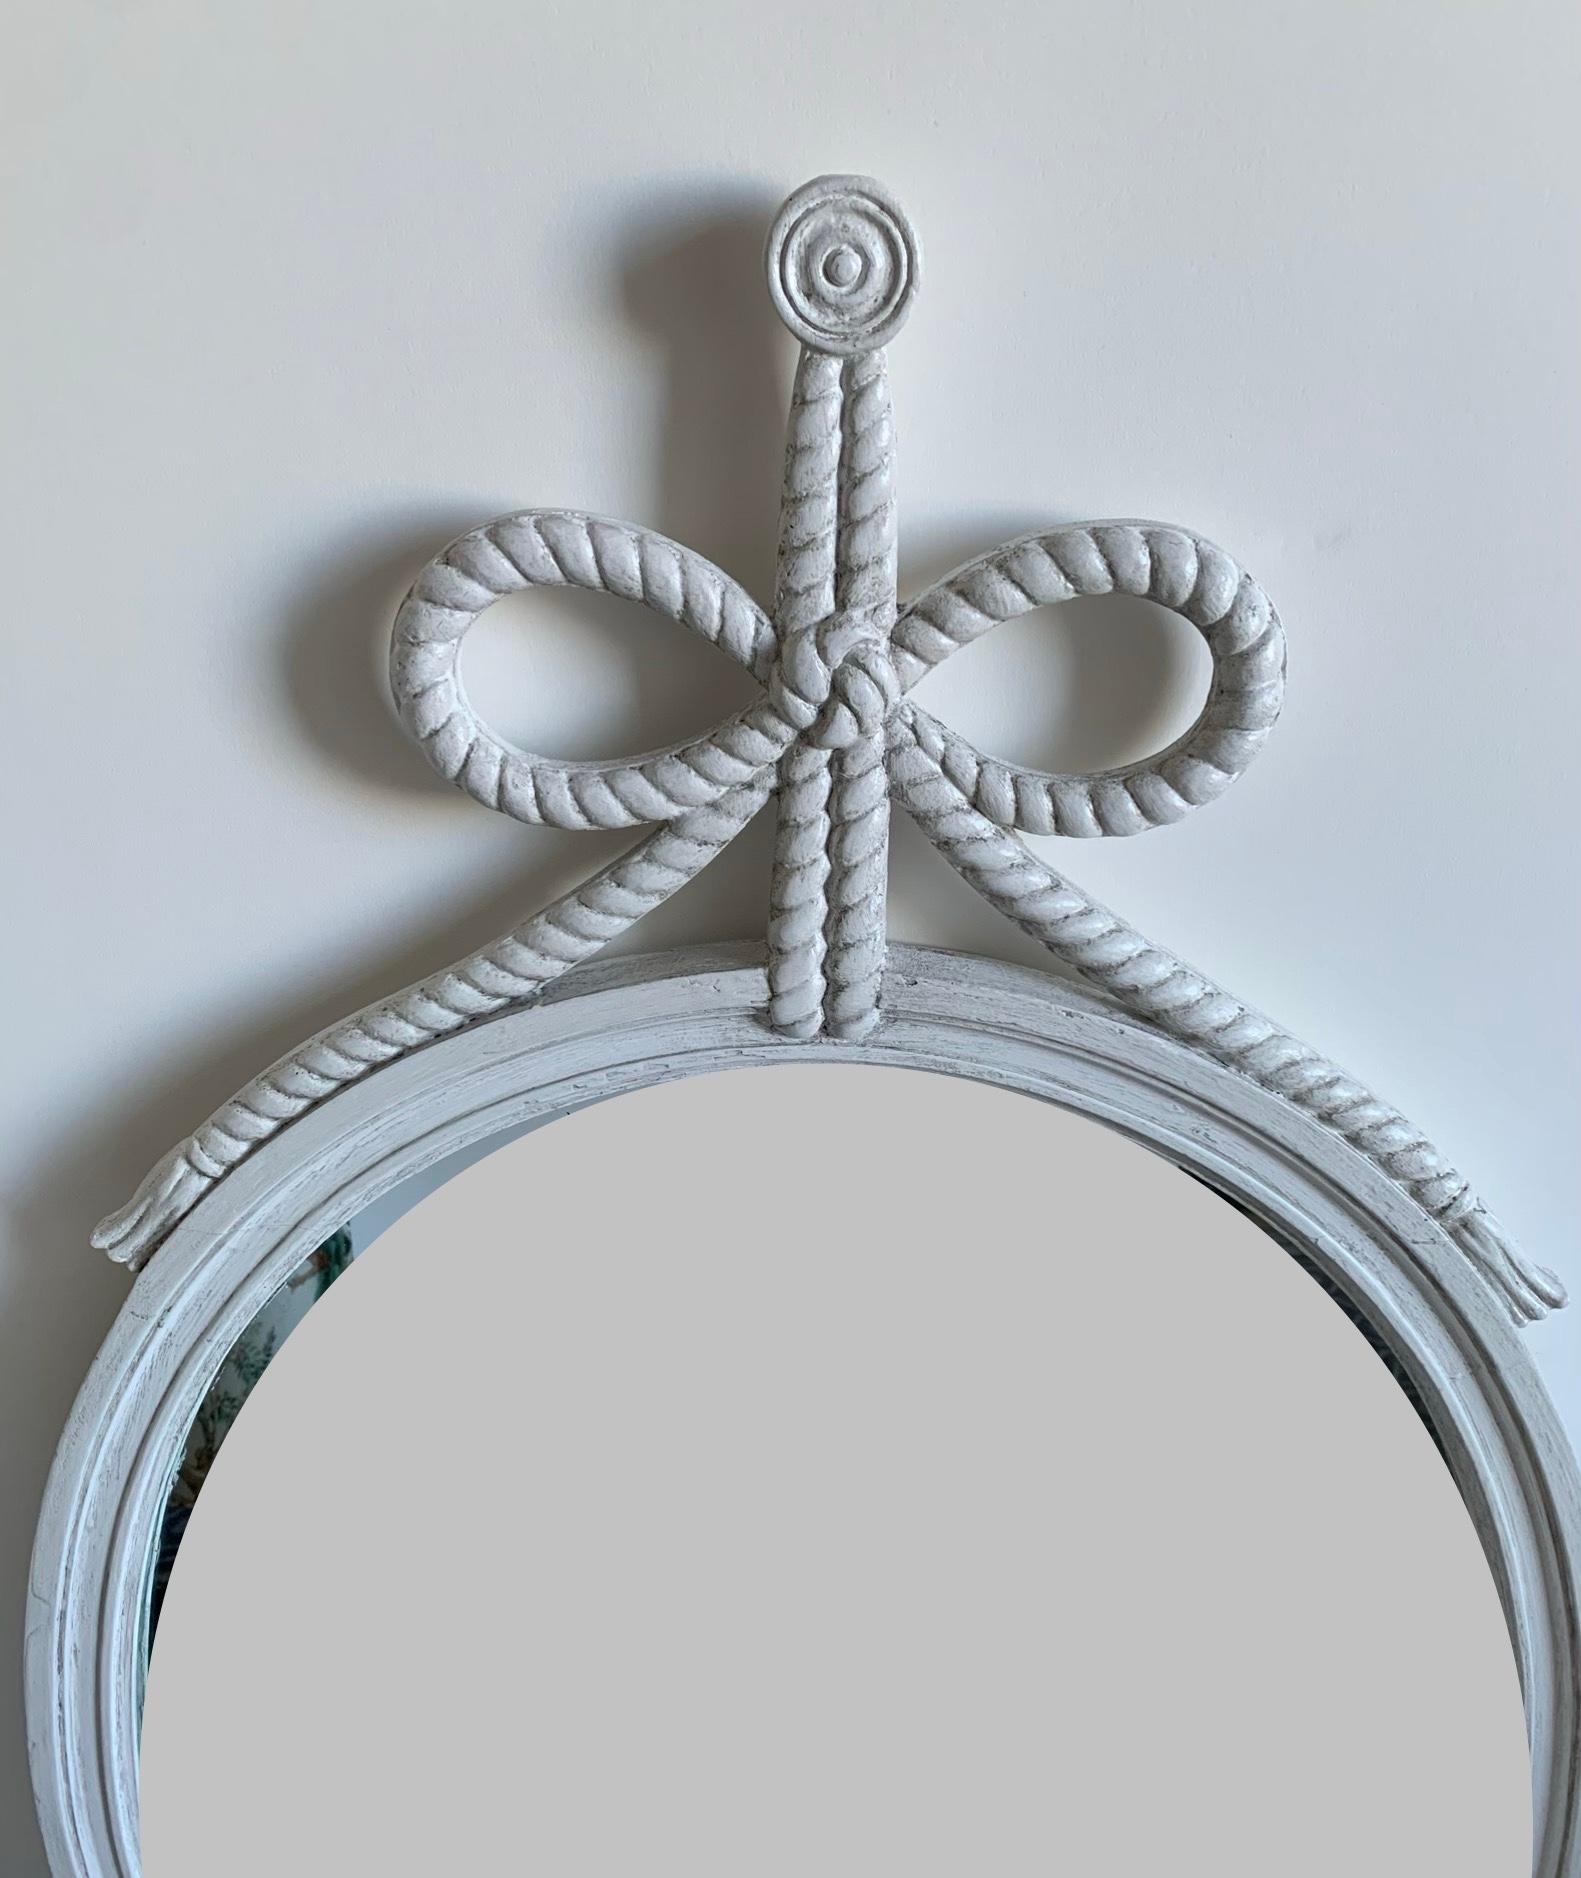 White neoclassical style oval mirror. Original mirrored glass with overall antiquing. Carved rope and bow detailing. Newly refinished in an antique white painted finish.